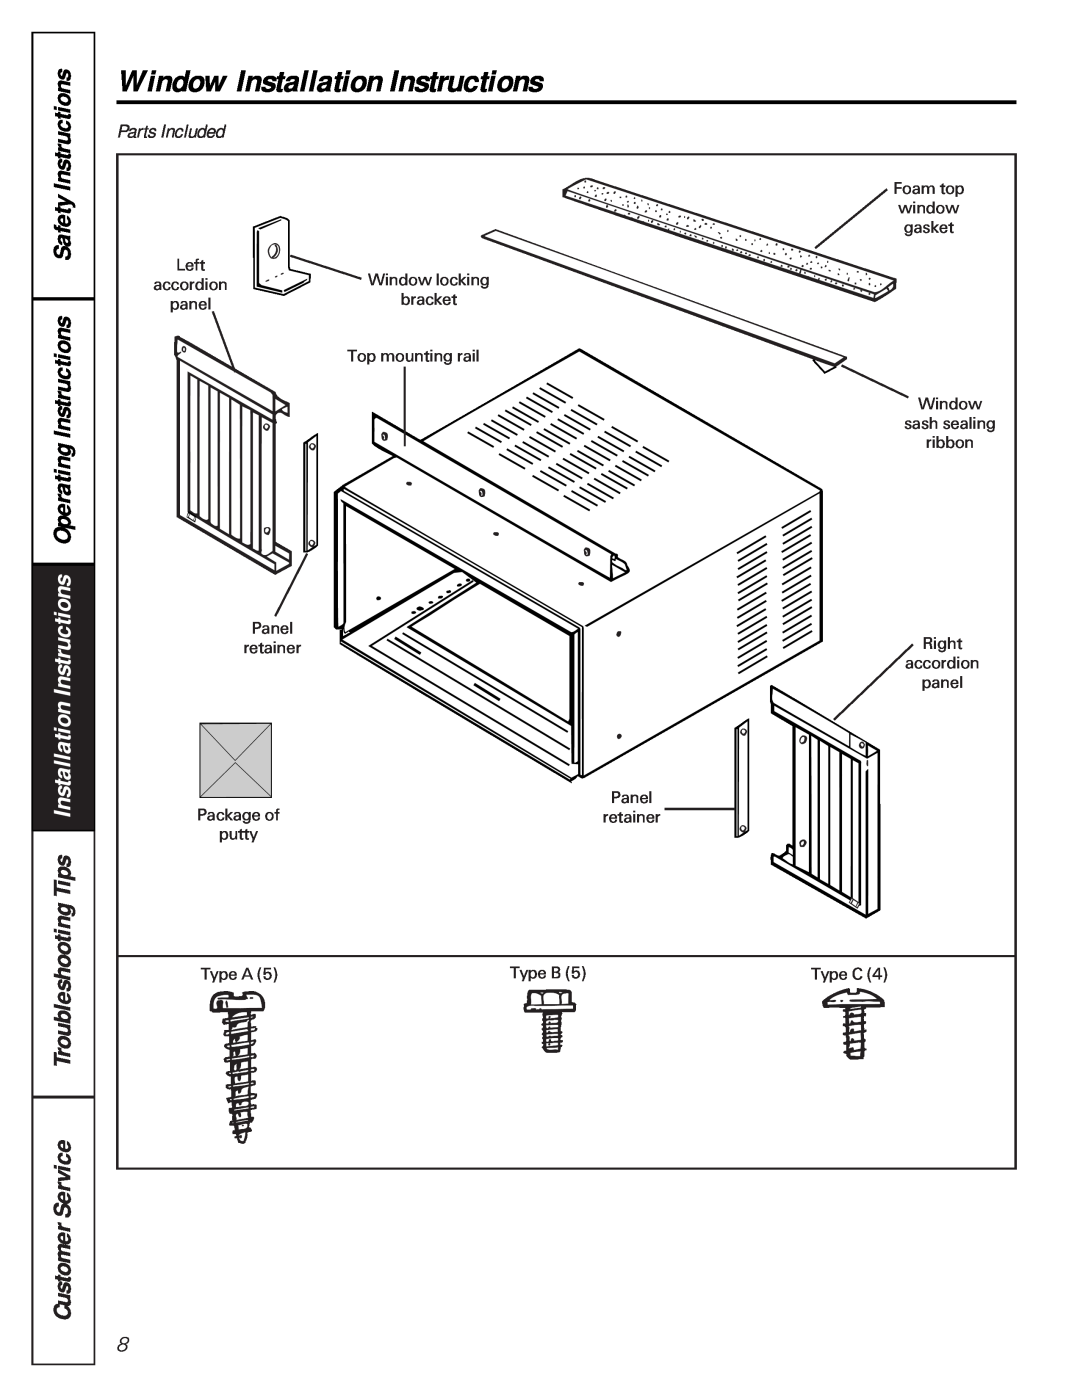 GE AMH12, AMH10 owner manual Window Installation Instructions, Parts Included, CustomerService 